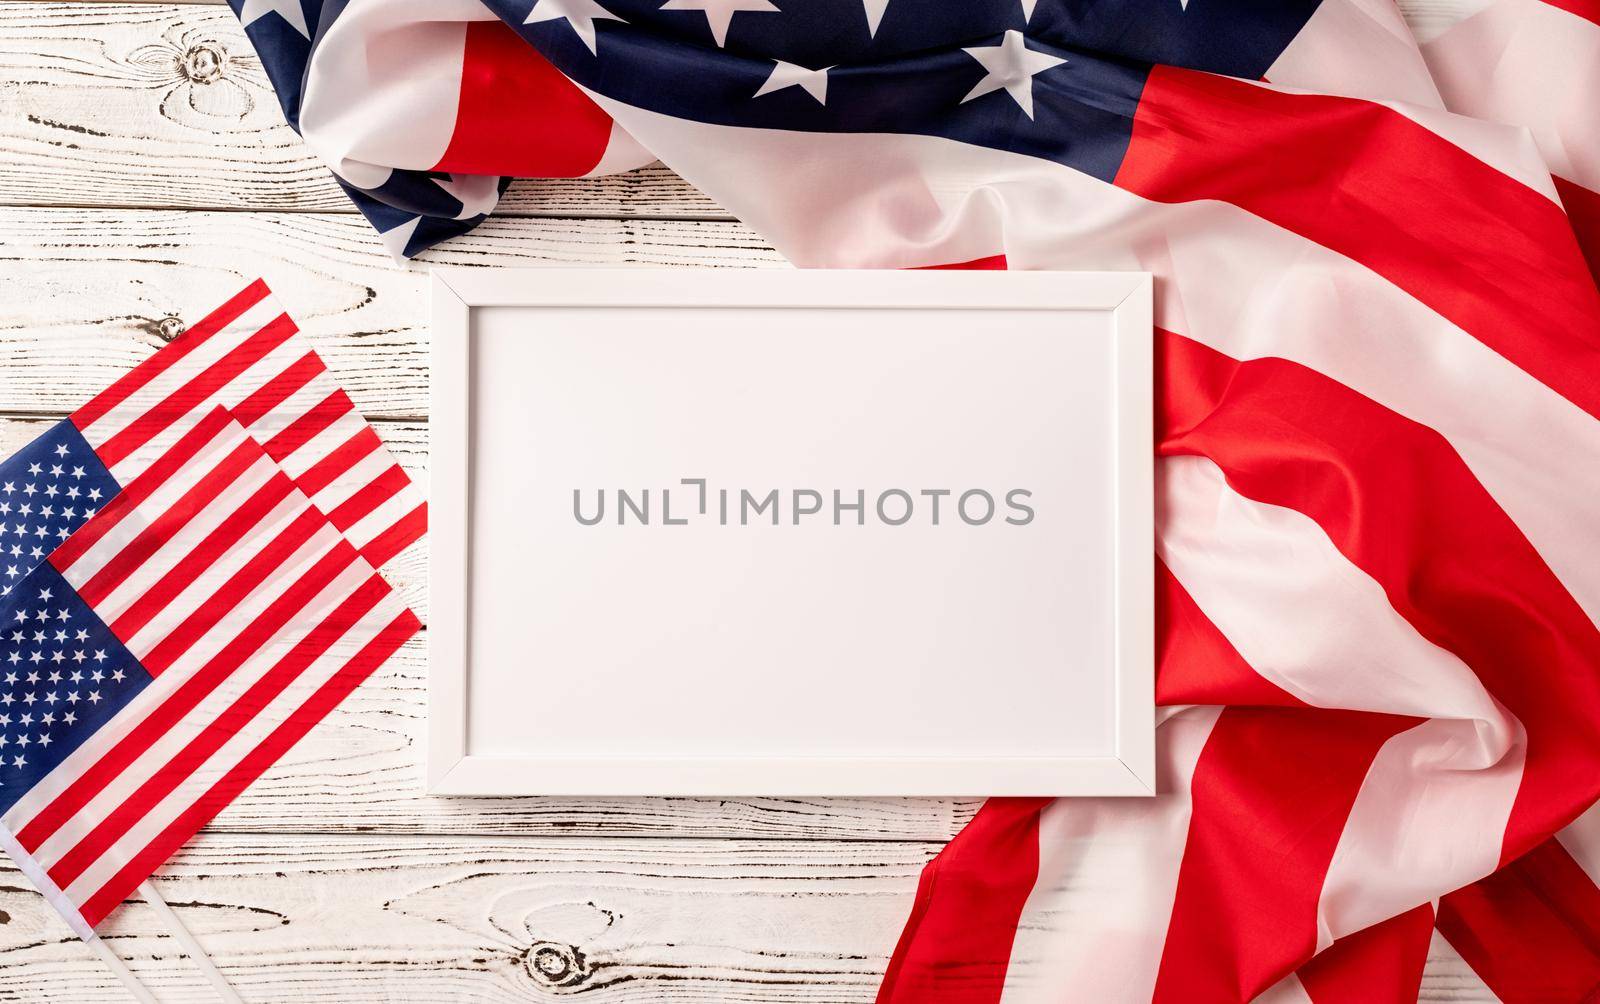 USA Memorial day, Presidents day, Veterans day, Labor day, or 4th of July celebration. Blank white photo frame for mockup design on American national flag wooden background